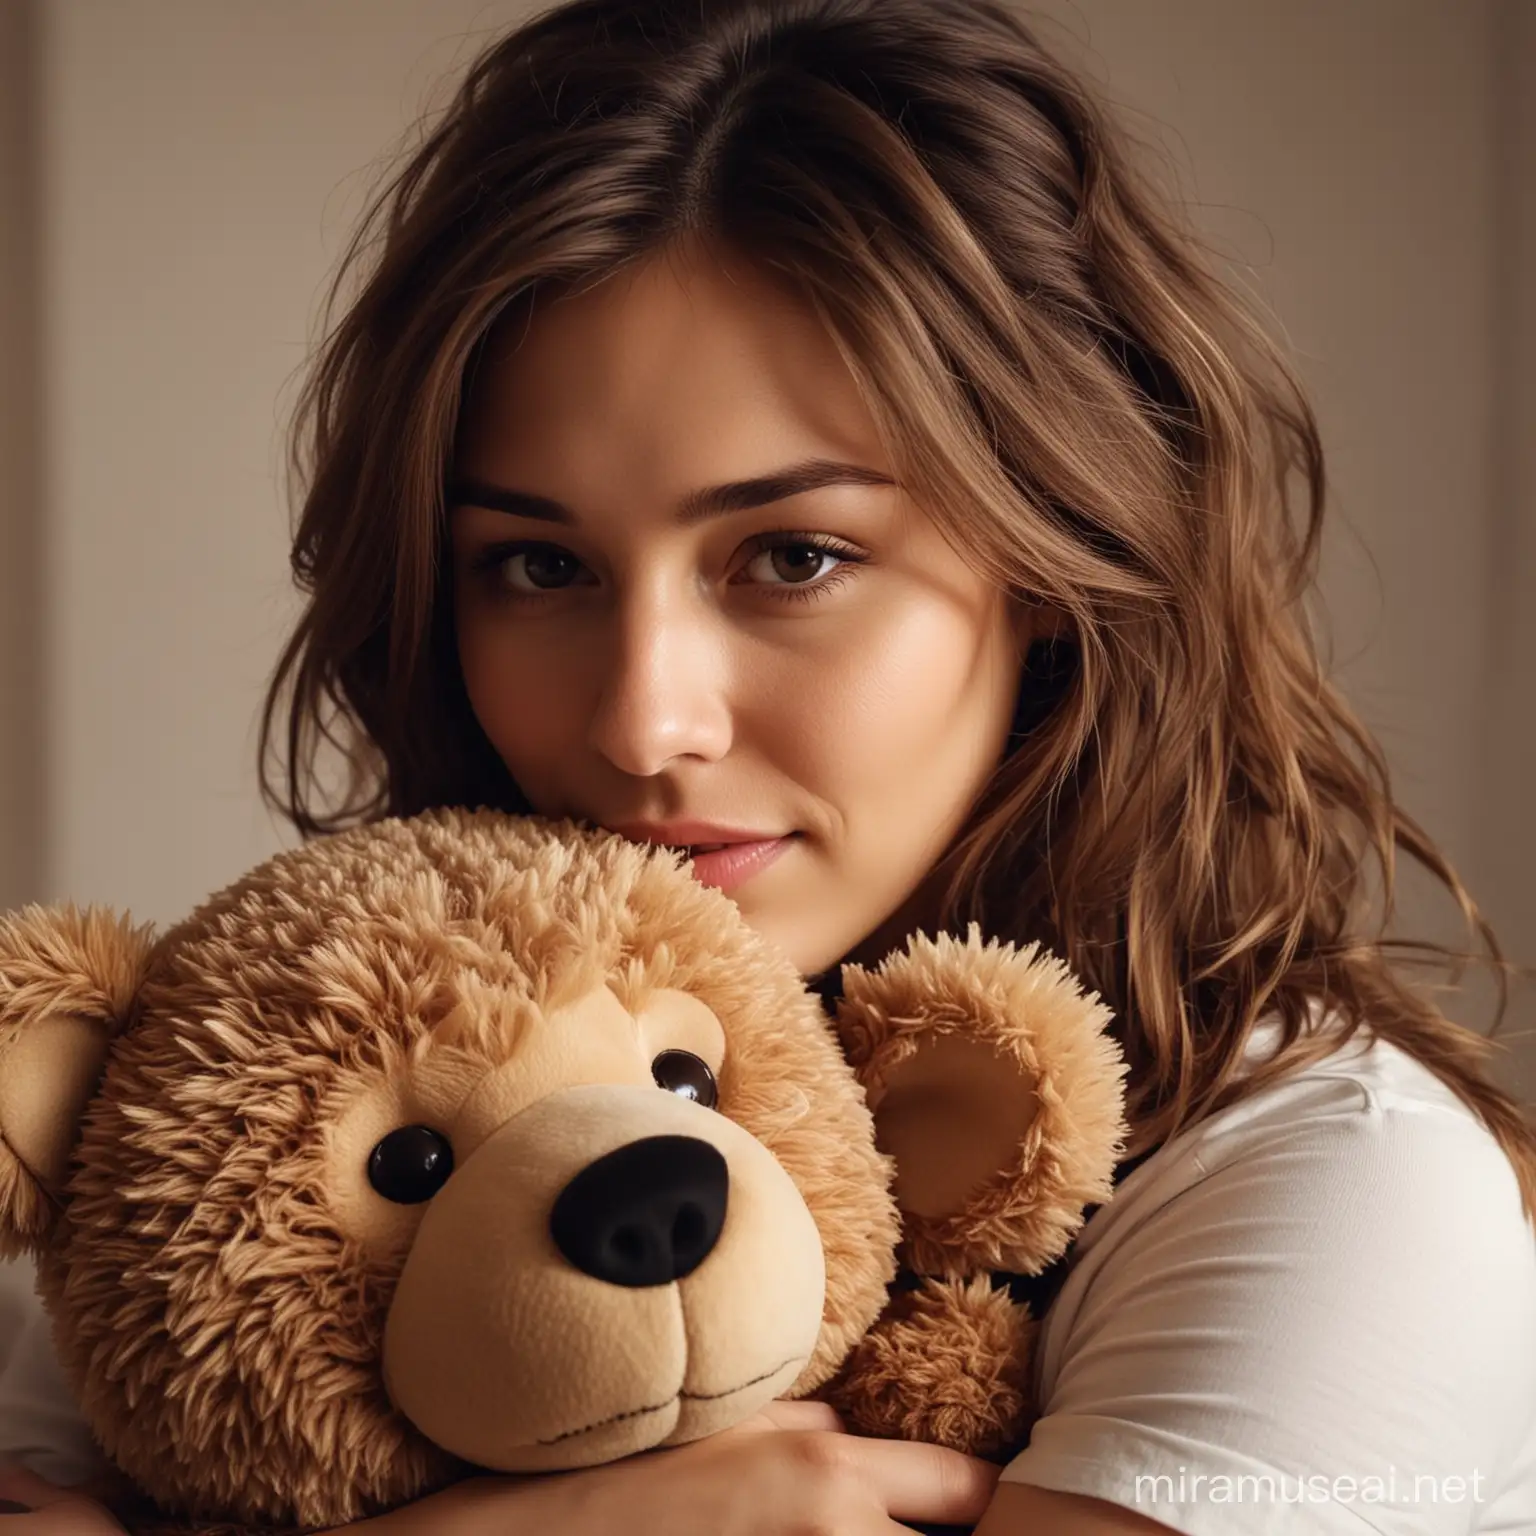 Woman Embracing Teddy Bear Romantic Cinematic Photography in HD